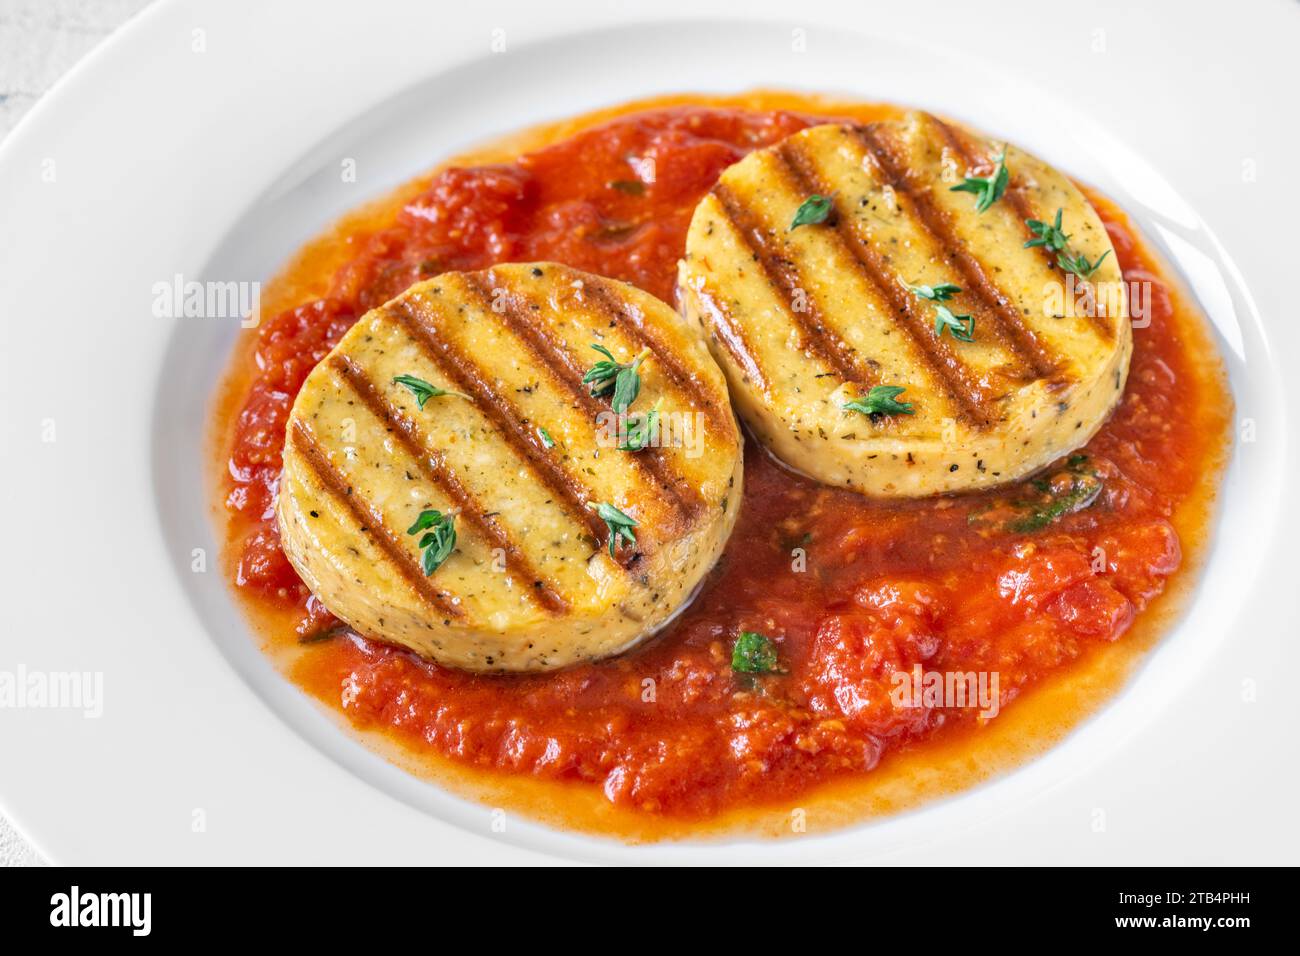 Portion of grilled cheese with tomato basil sauce Stock Photo